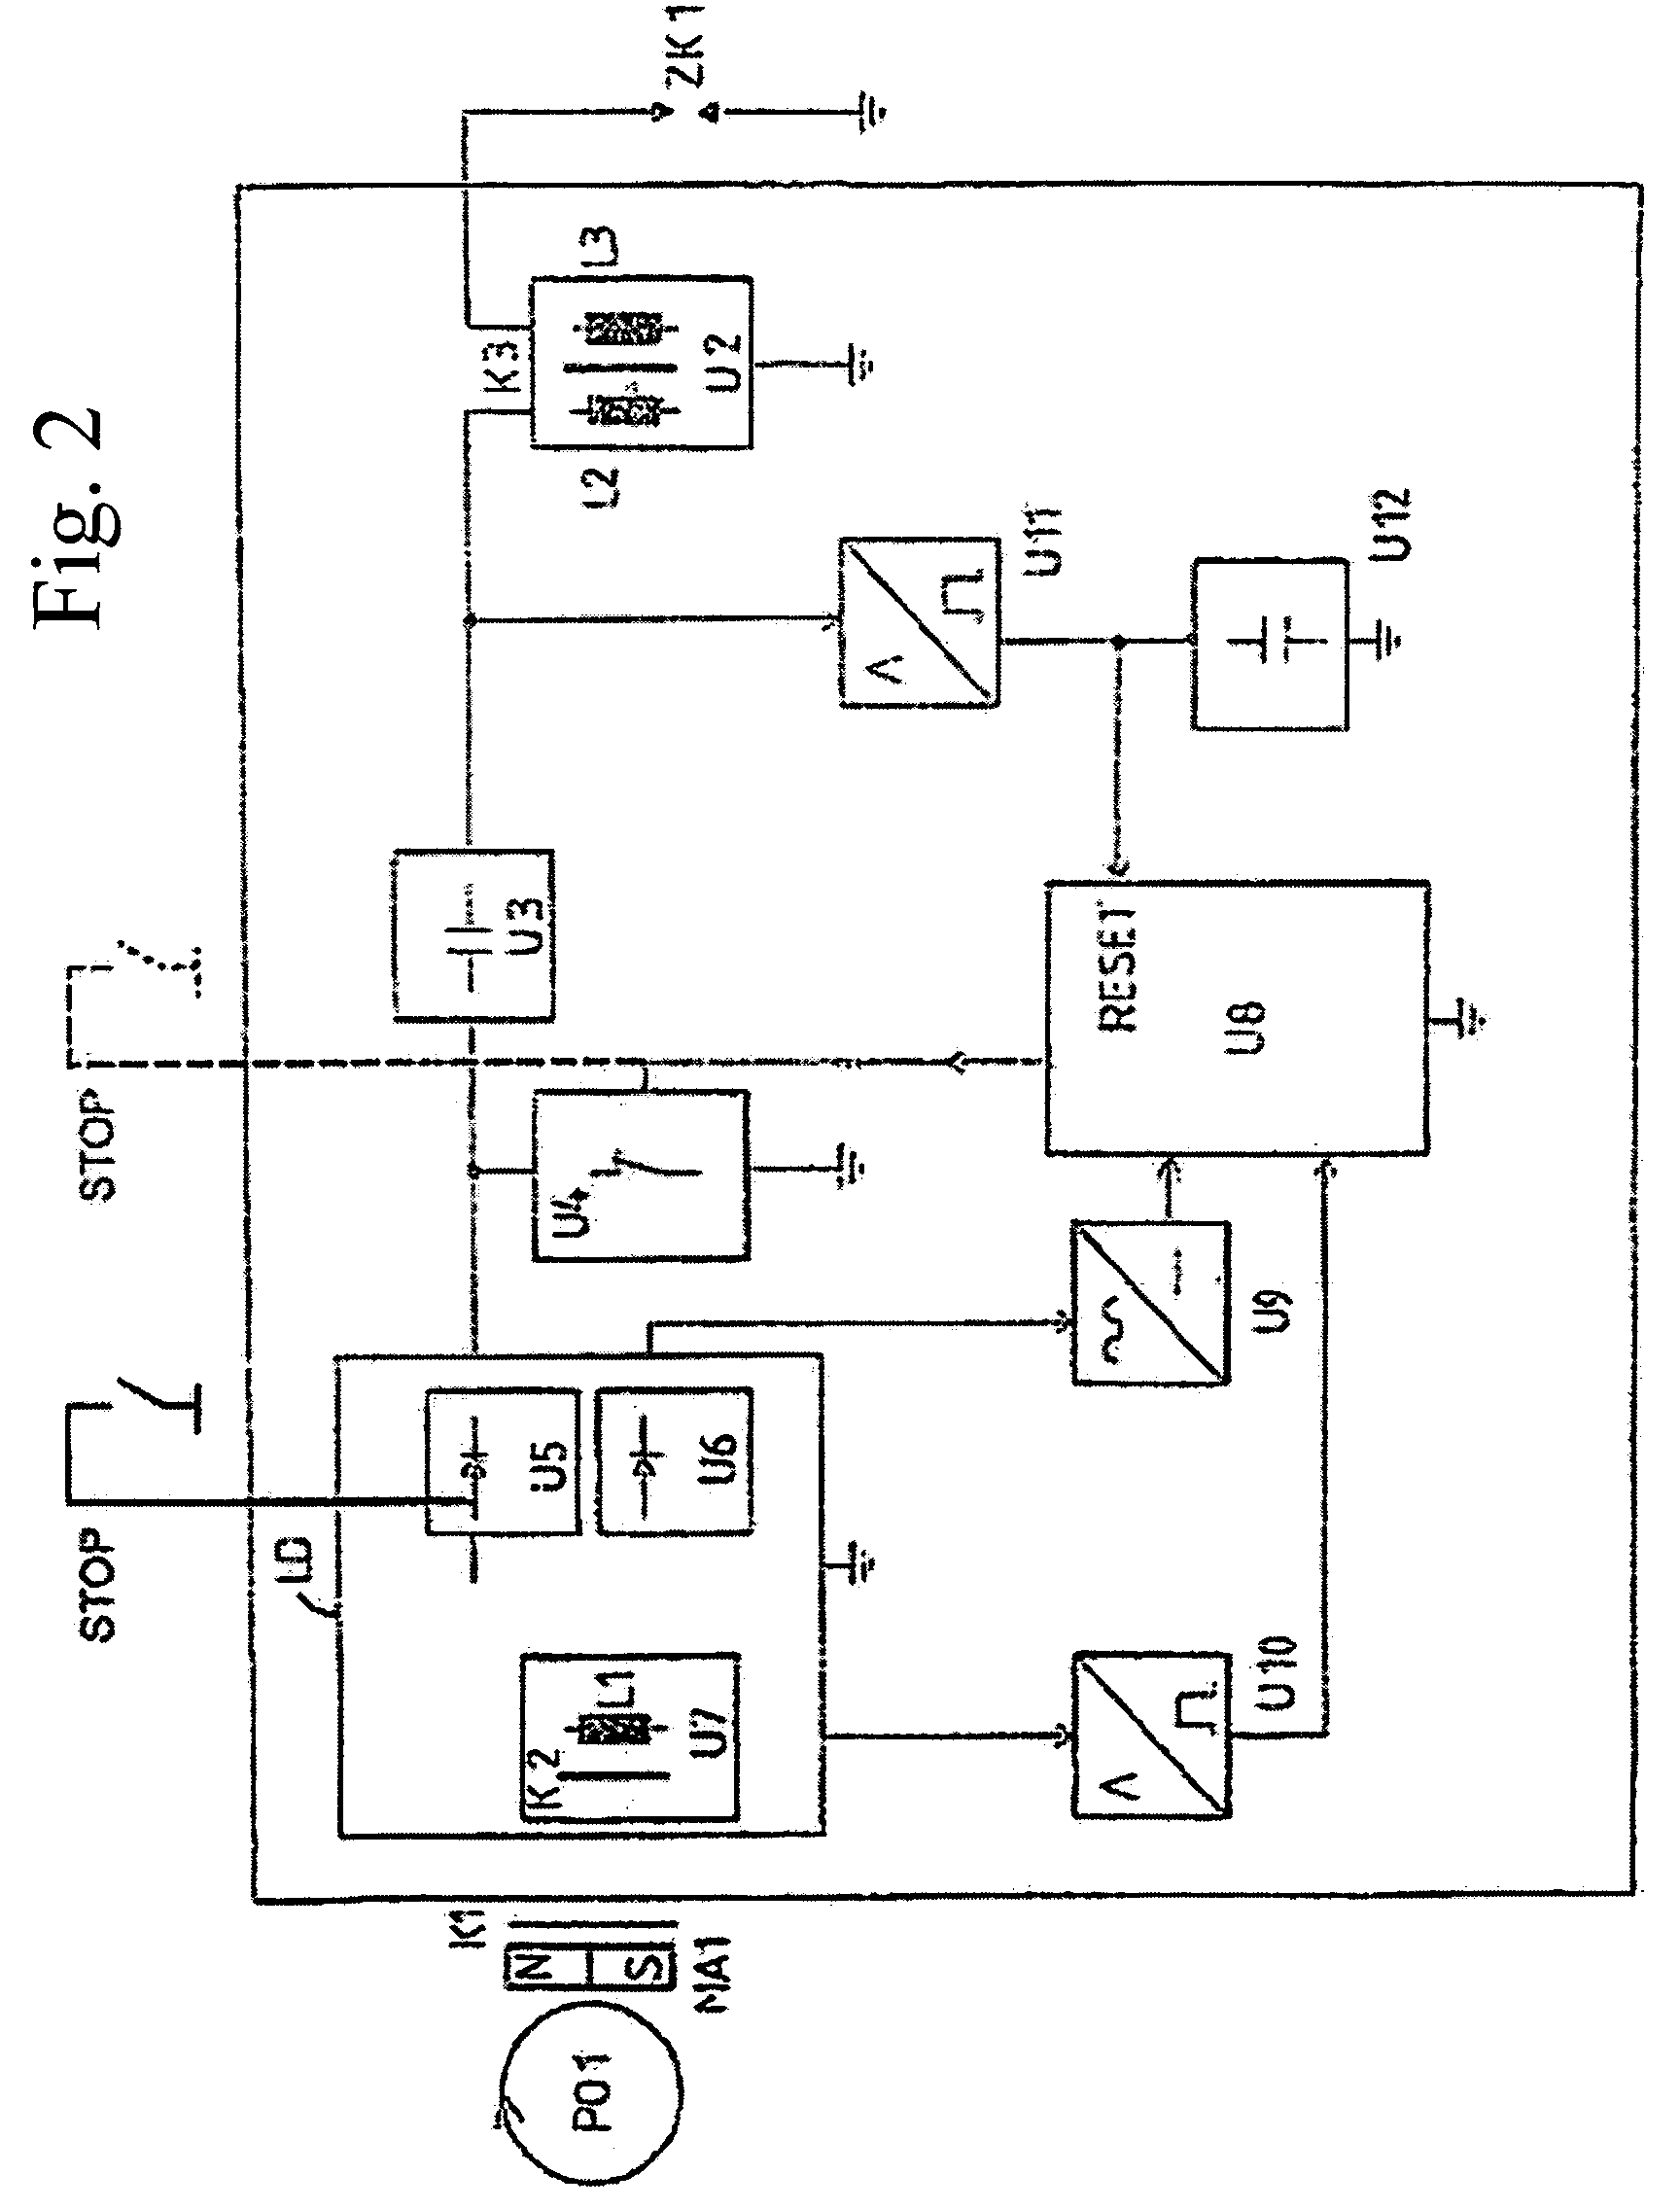 Ignition method with stop switch for internal-combustion engines